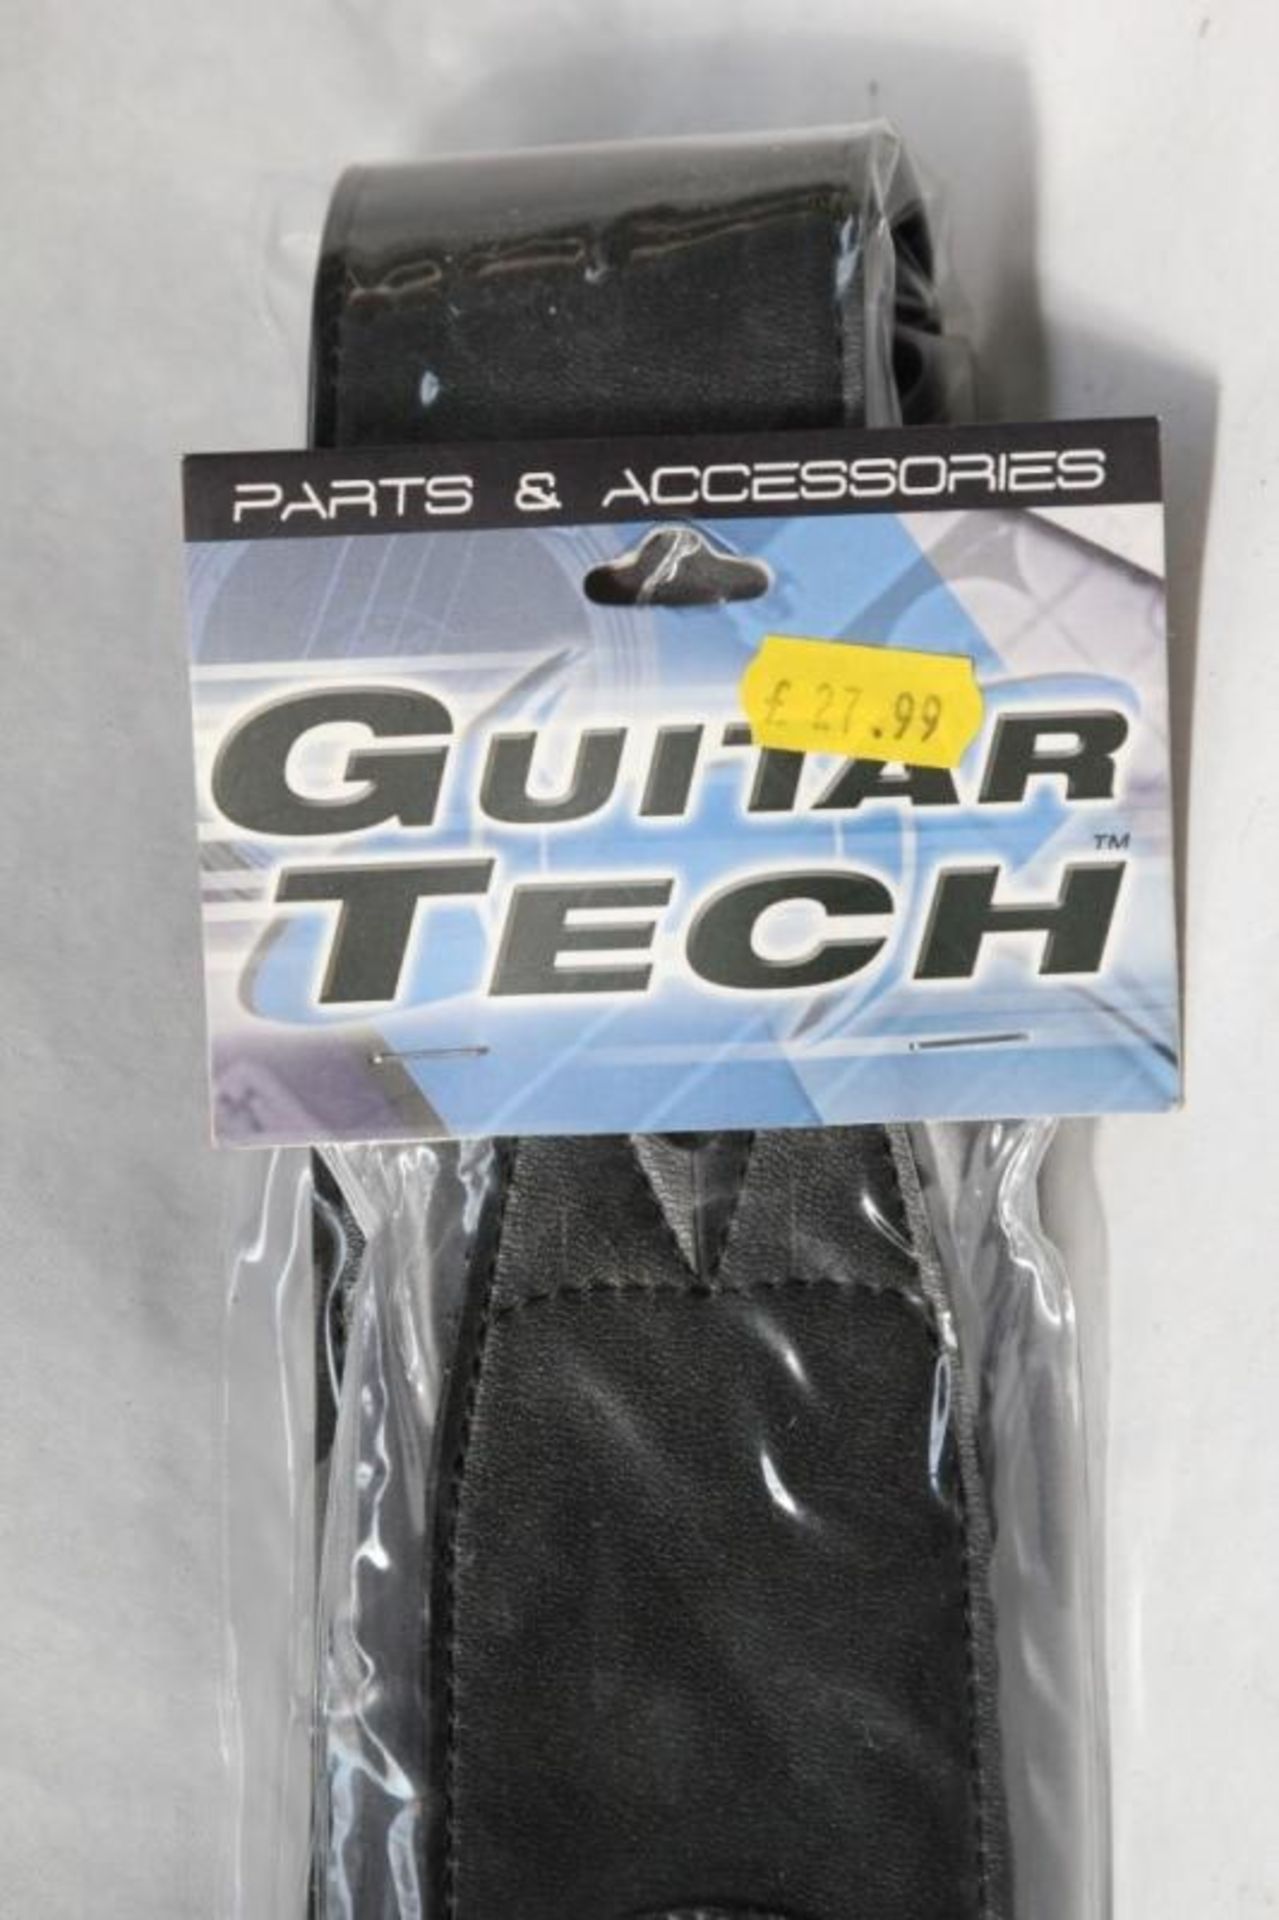 1 x Guitar Tech Leather Studded Guitar Strap - New in Packet - CL020 - Ref Pro173 - Location: Altrin - Image 2 of 3